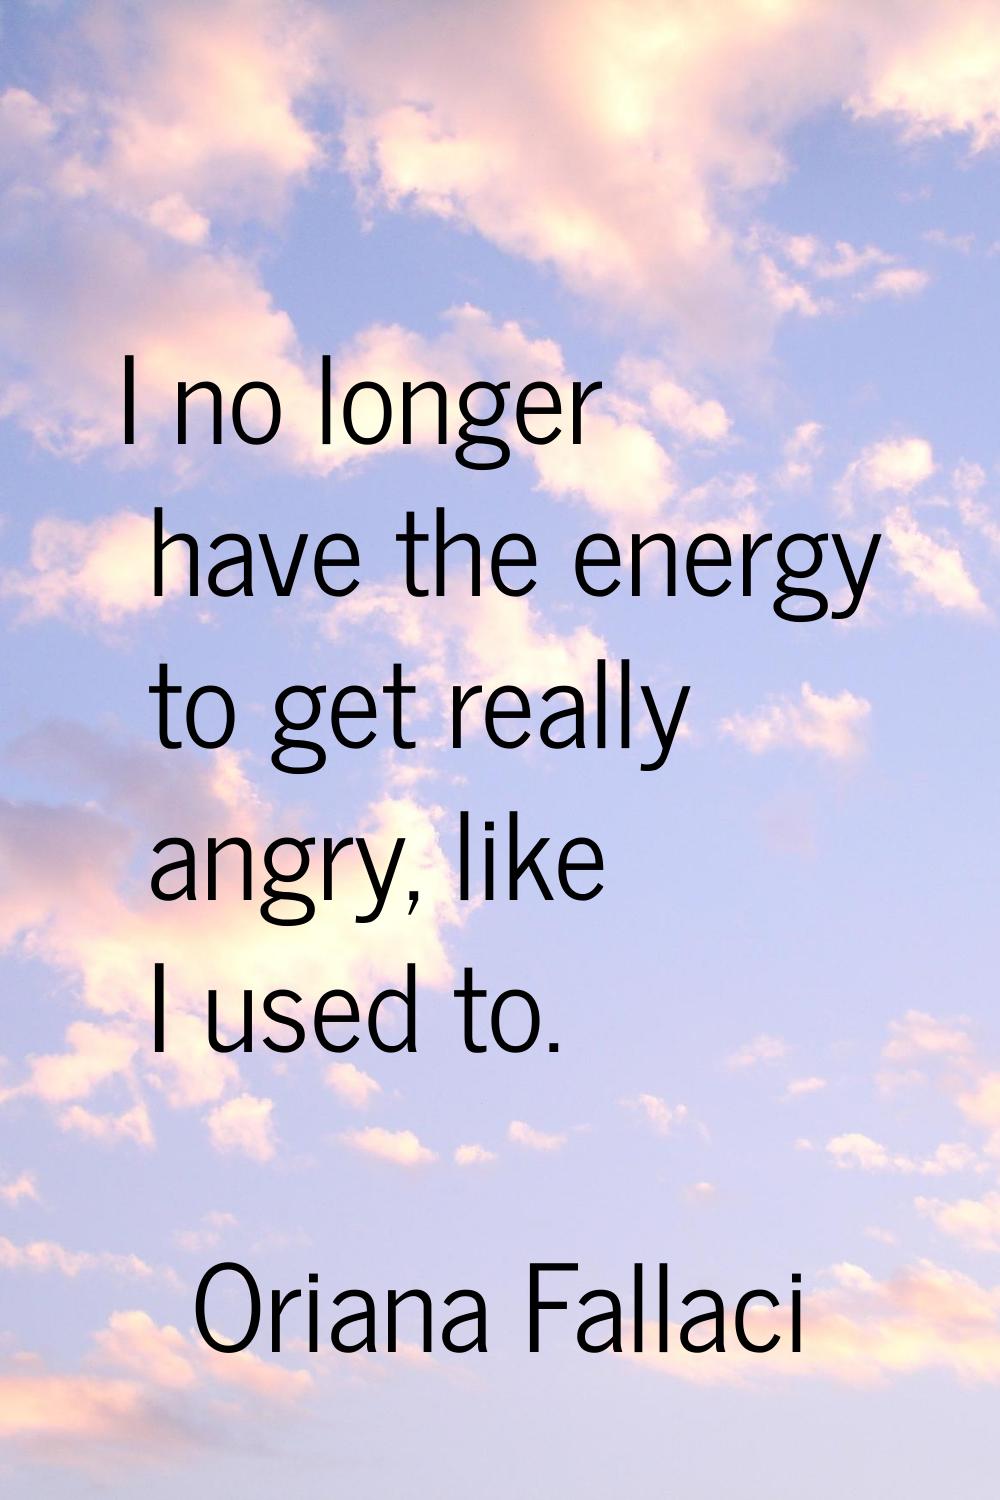 I no longer have the energy to get really angry, like I used to.